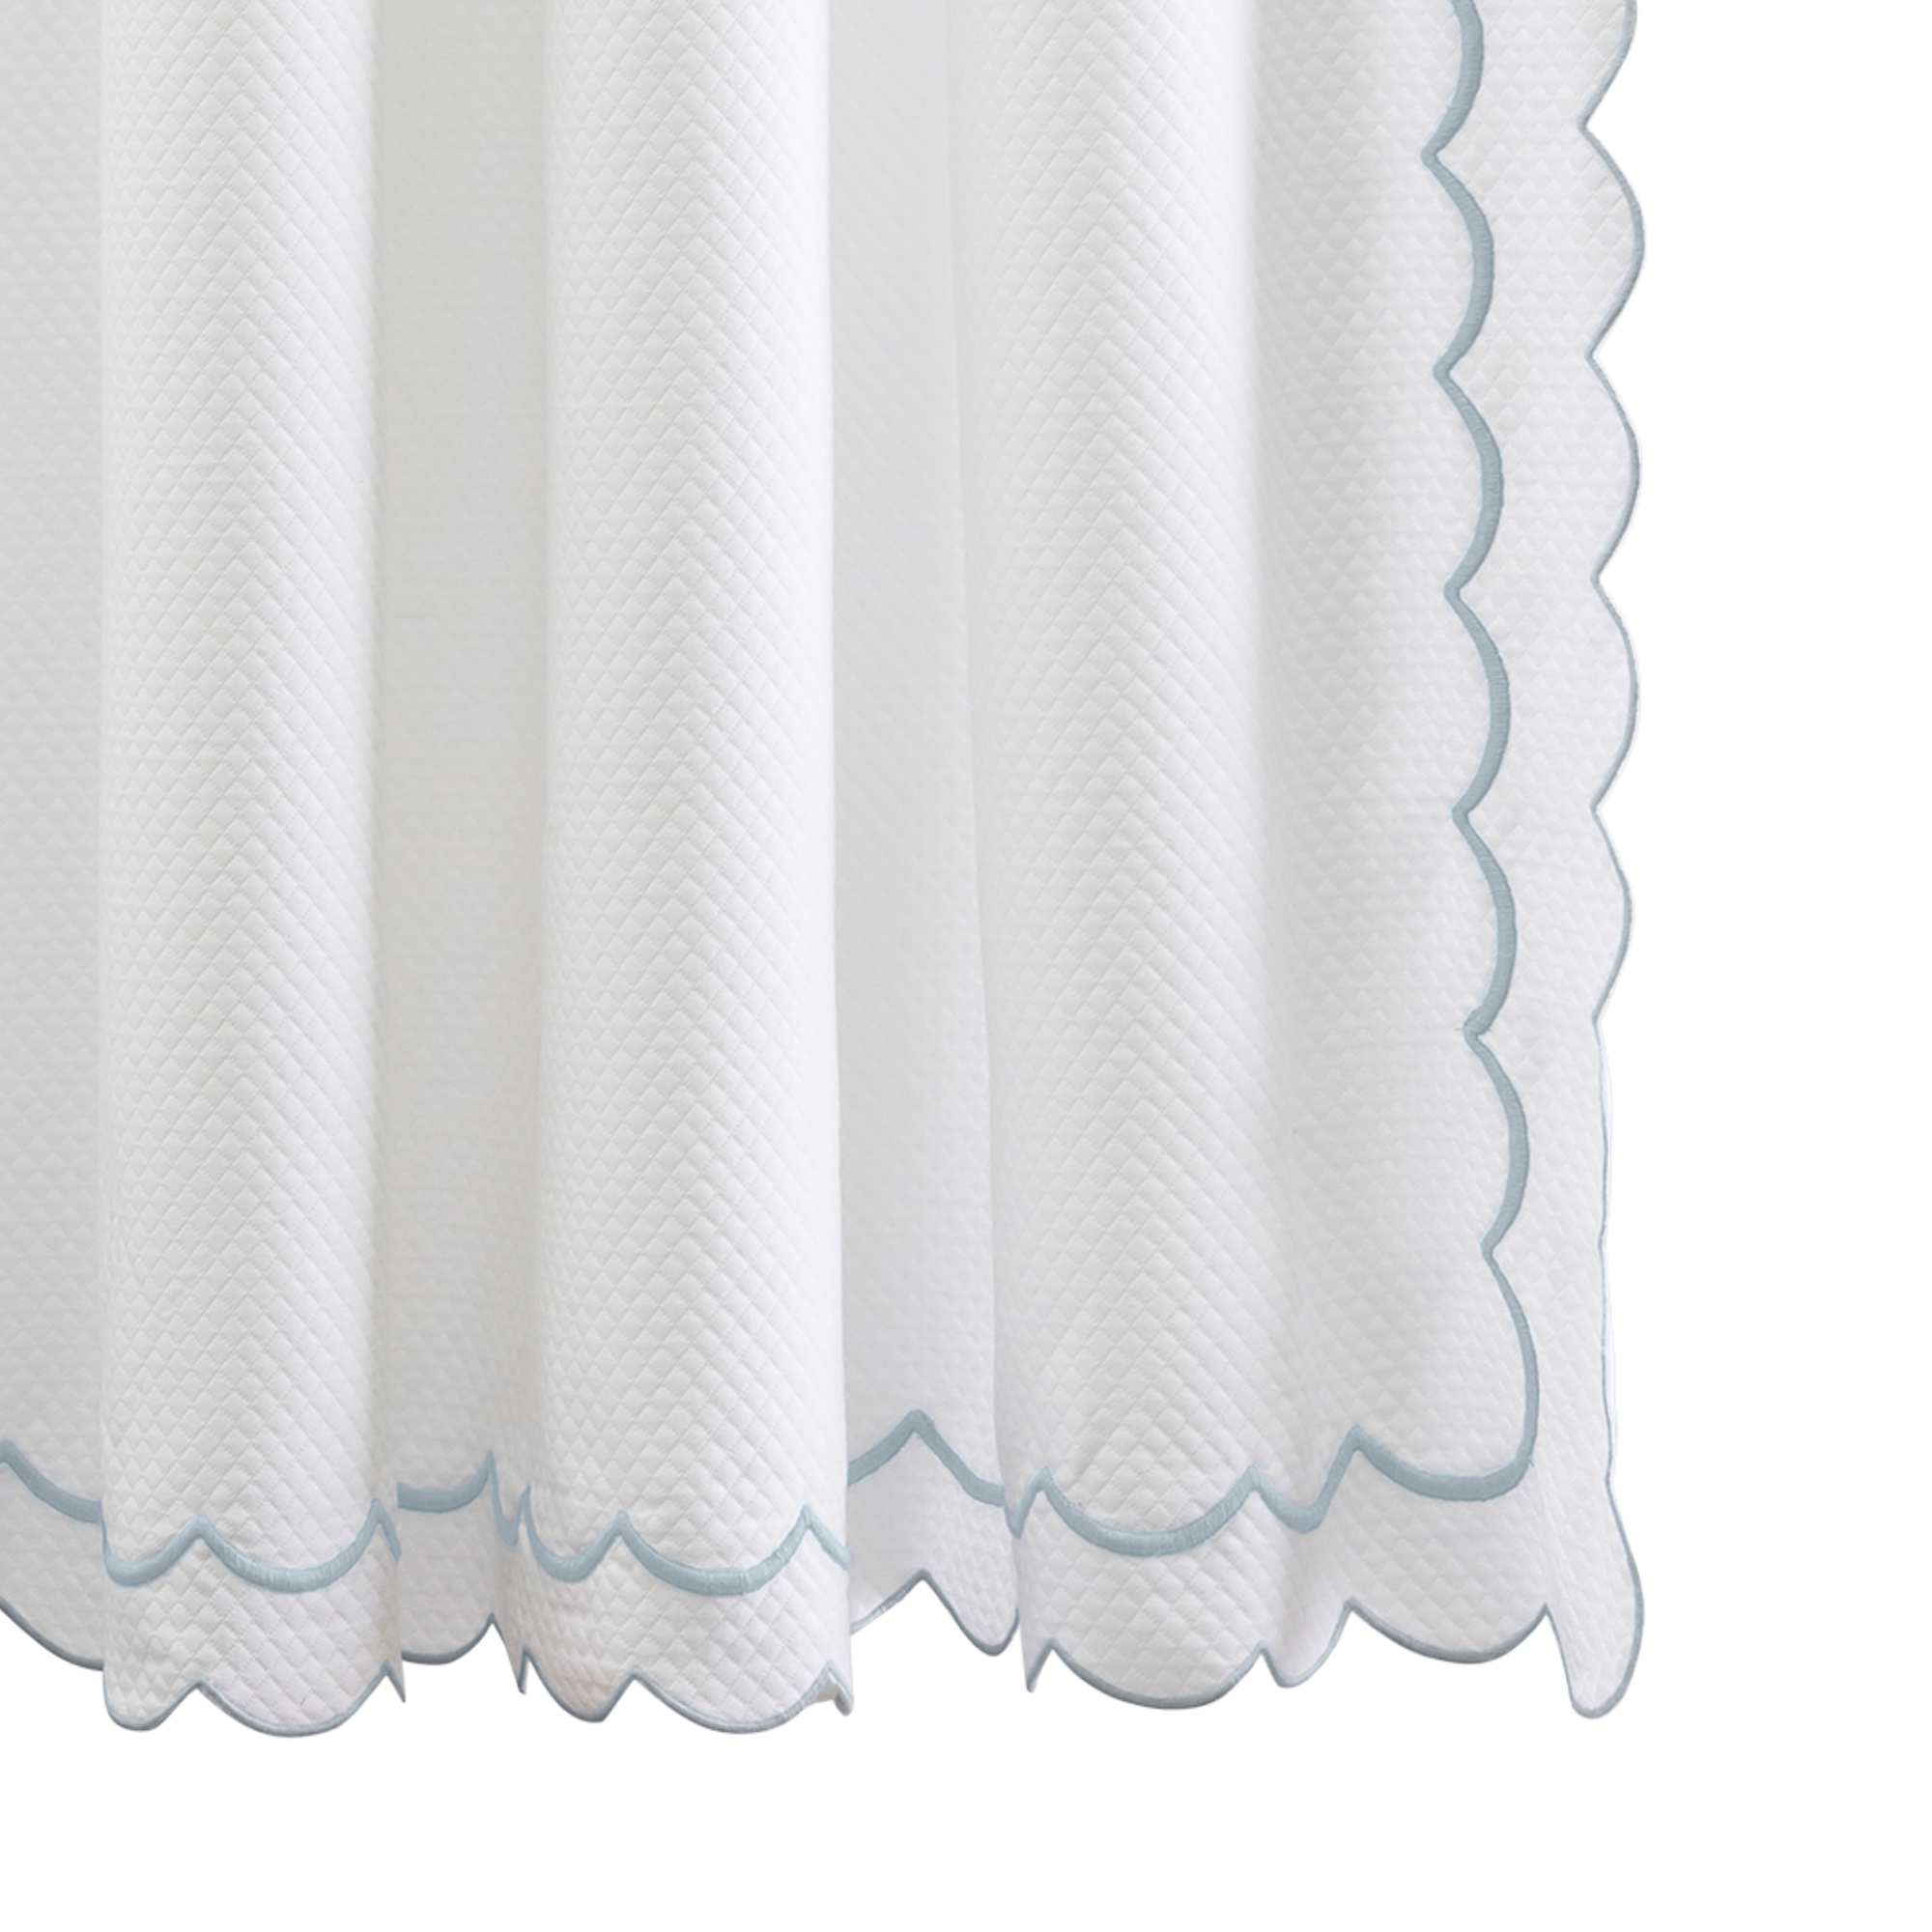 Hanging Edges of Matouk Indie Pique Shower Curtain in Pool Color